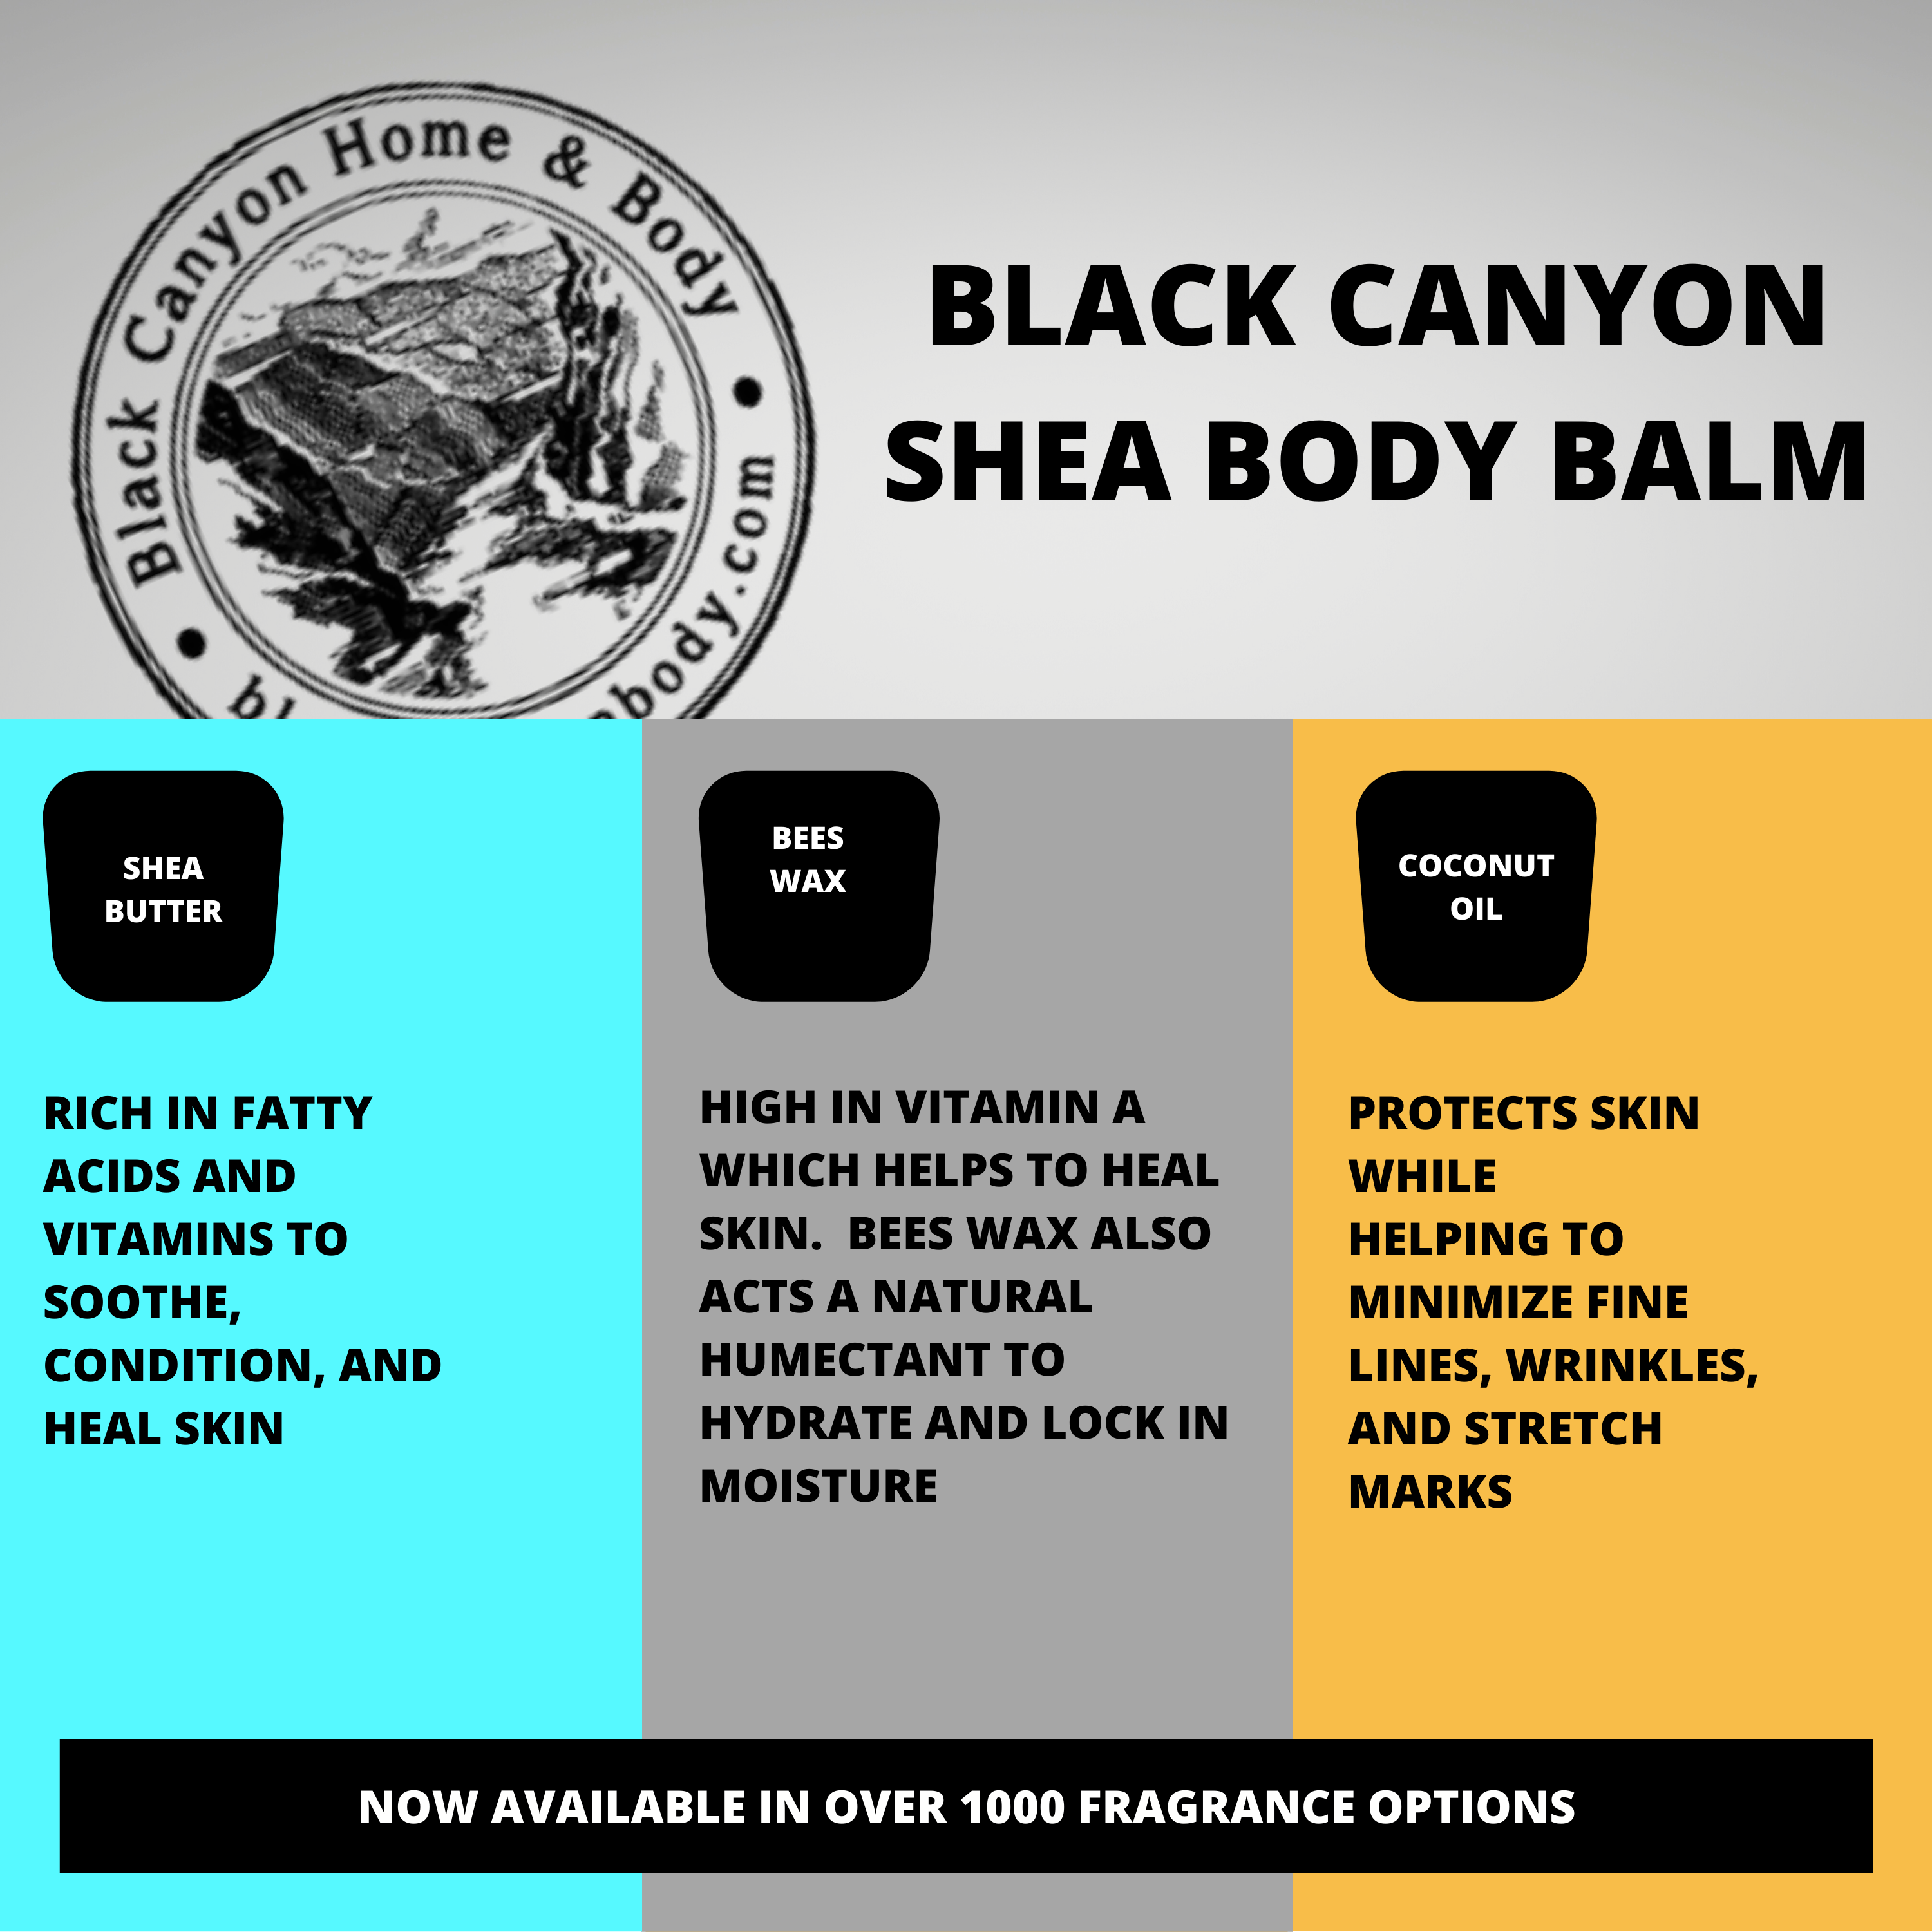 Black Canyon Apple Berry Ice Scented Natural Body Balm with Shea